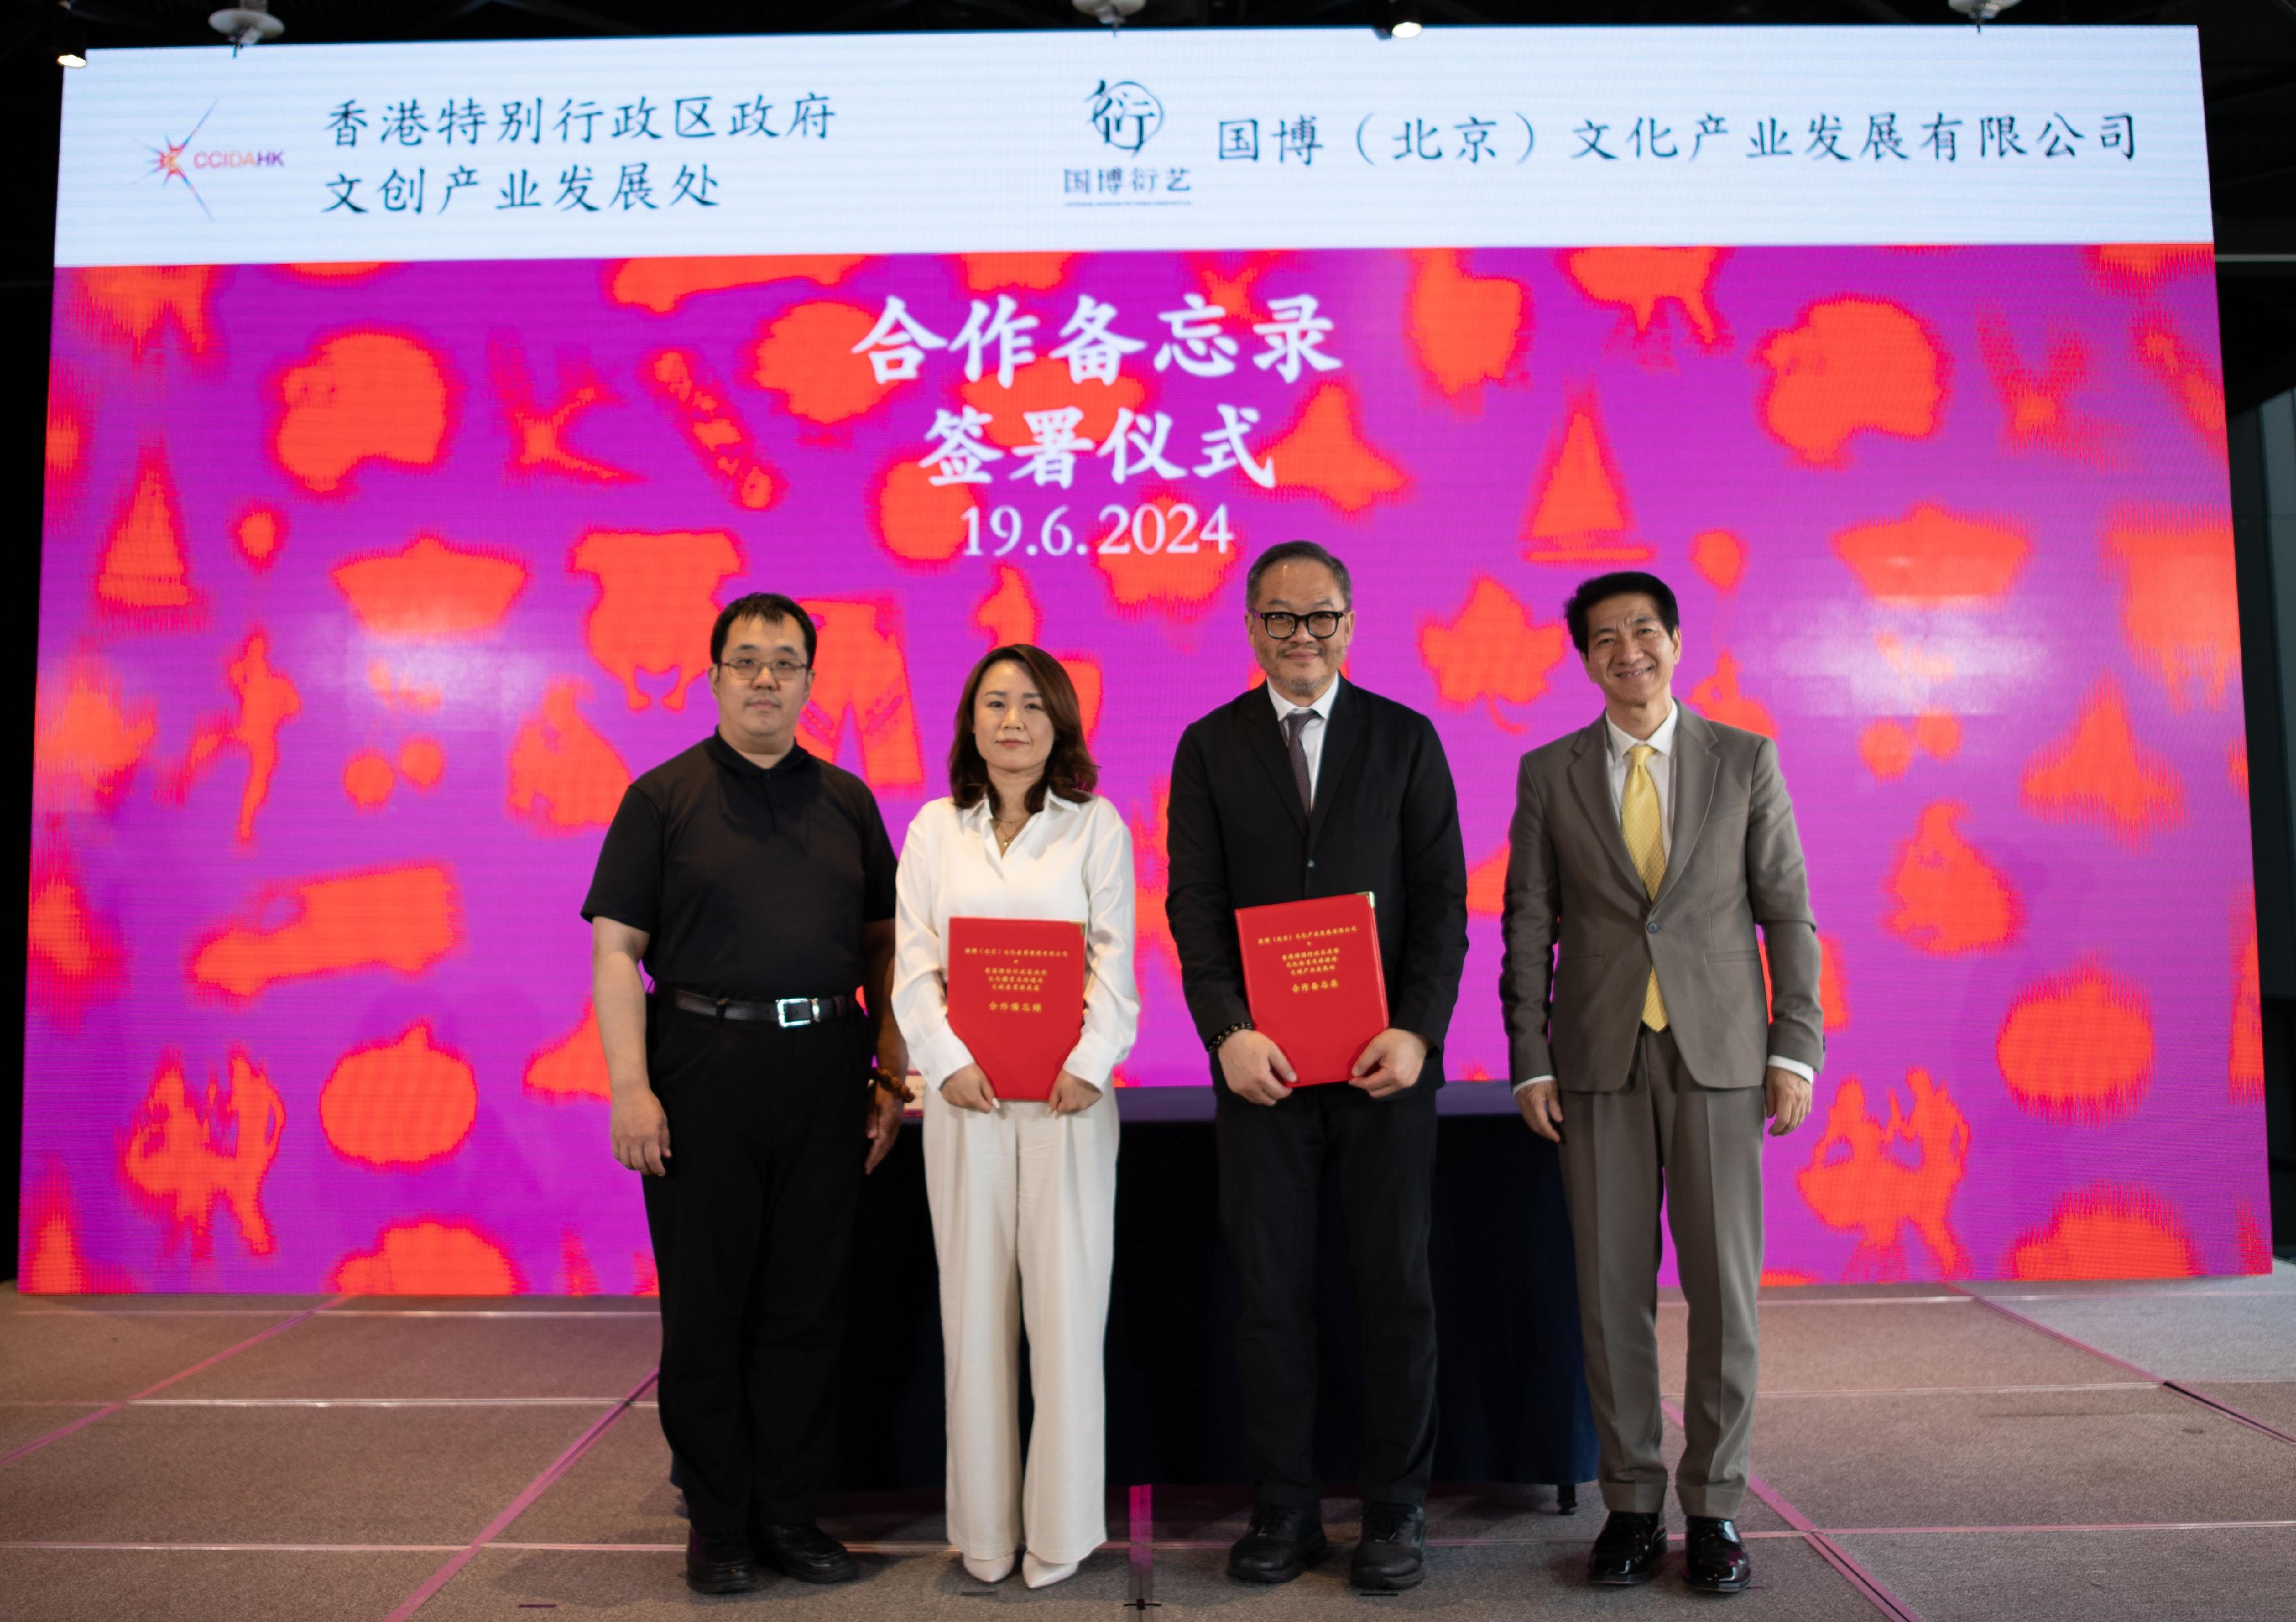 The Cultural and Creative Industries Development Agency of the Culture, Sports and Tourism Bureau signed a Memorandum of Understanding with the National Museum of China (NMC) (Beijing) Cultural Industry Development Co Ltd on June 19 in Beijing. Photo shows the Commissioner for Cultural and Creative Industries, Mr Victor Tsang (second right); the Office Director of NMC (Beijing) Cultural Industry Development Co Ltd, Ms Flora Ma (second left); the Deputy Director of the Operation and Development Department of the NMC and General Manager of NMC (Beijing) Cultural Industry Development Co Ltd, Mr Liao Fei (first left); and the Director of the Office of the Government of the Hong Kong Special Administrative Region in Beijing, Mr Rex Chang (first right).